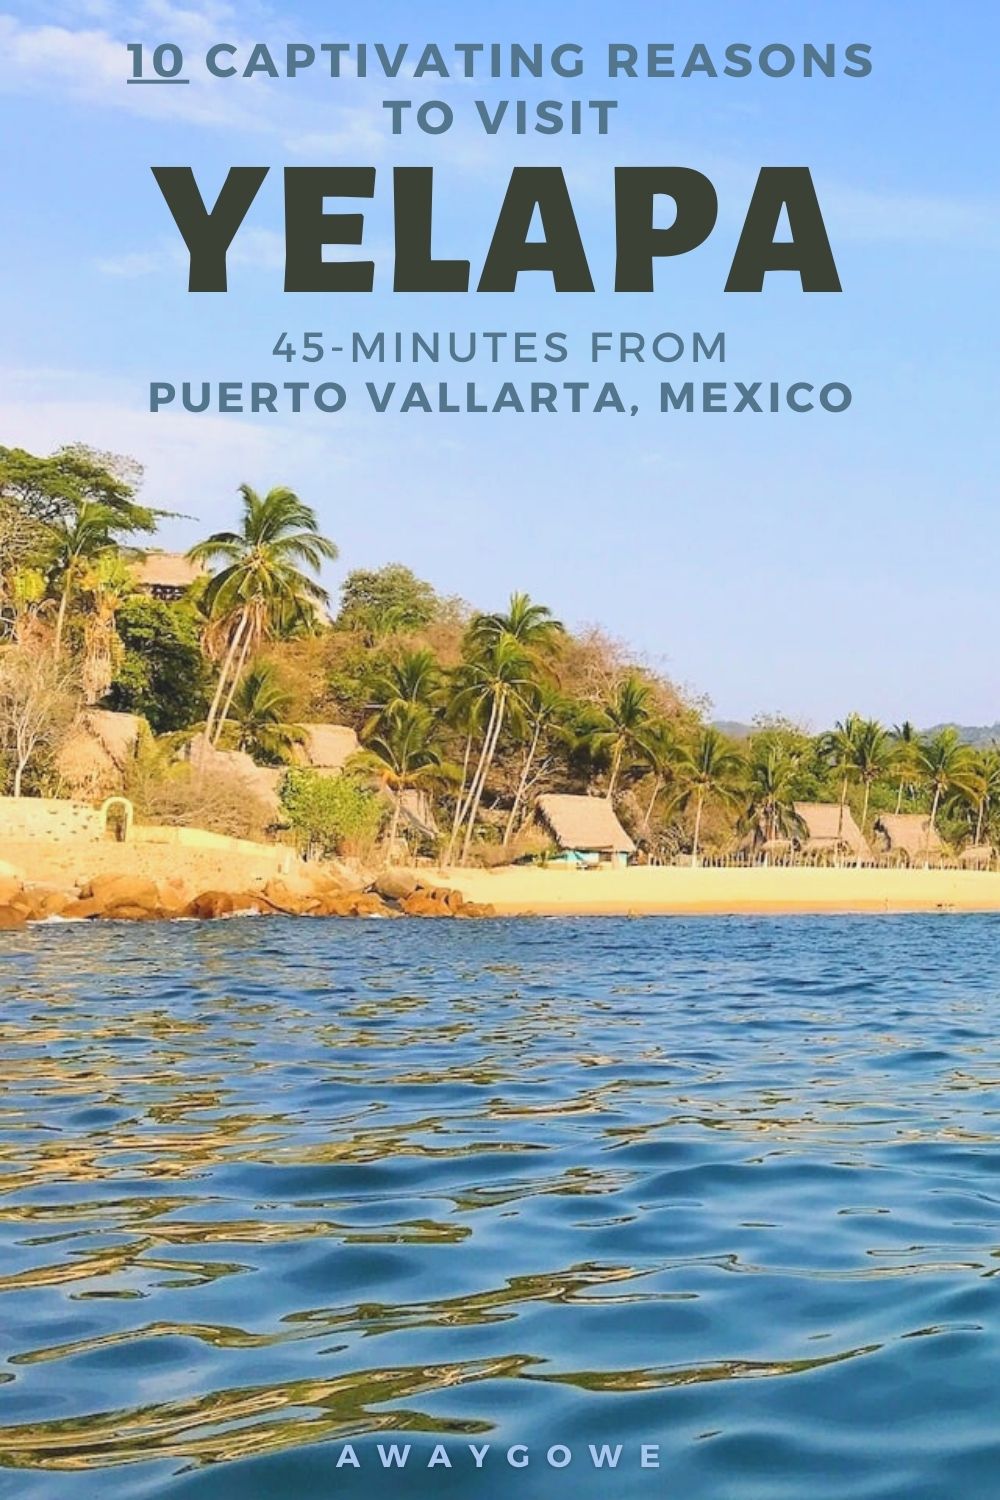 Exploring Puerto Vallarta's old town and tiny perfect beach village Chacala